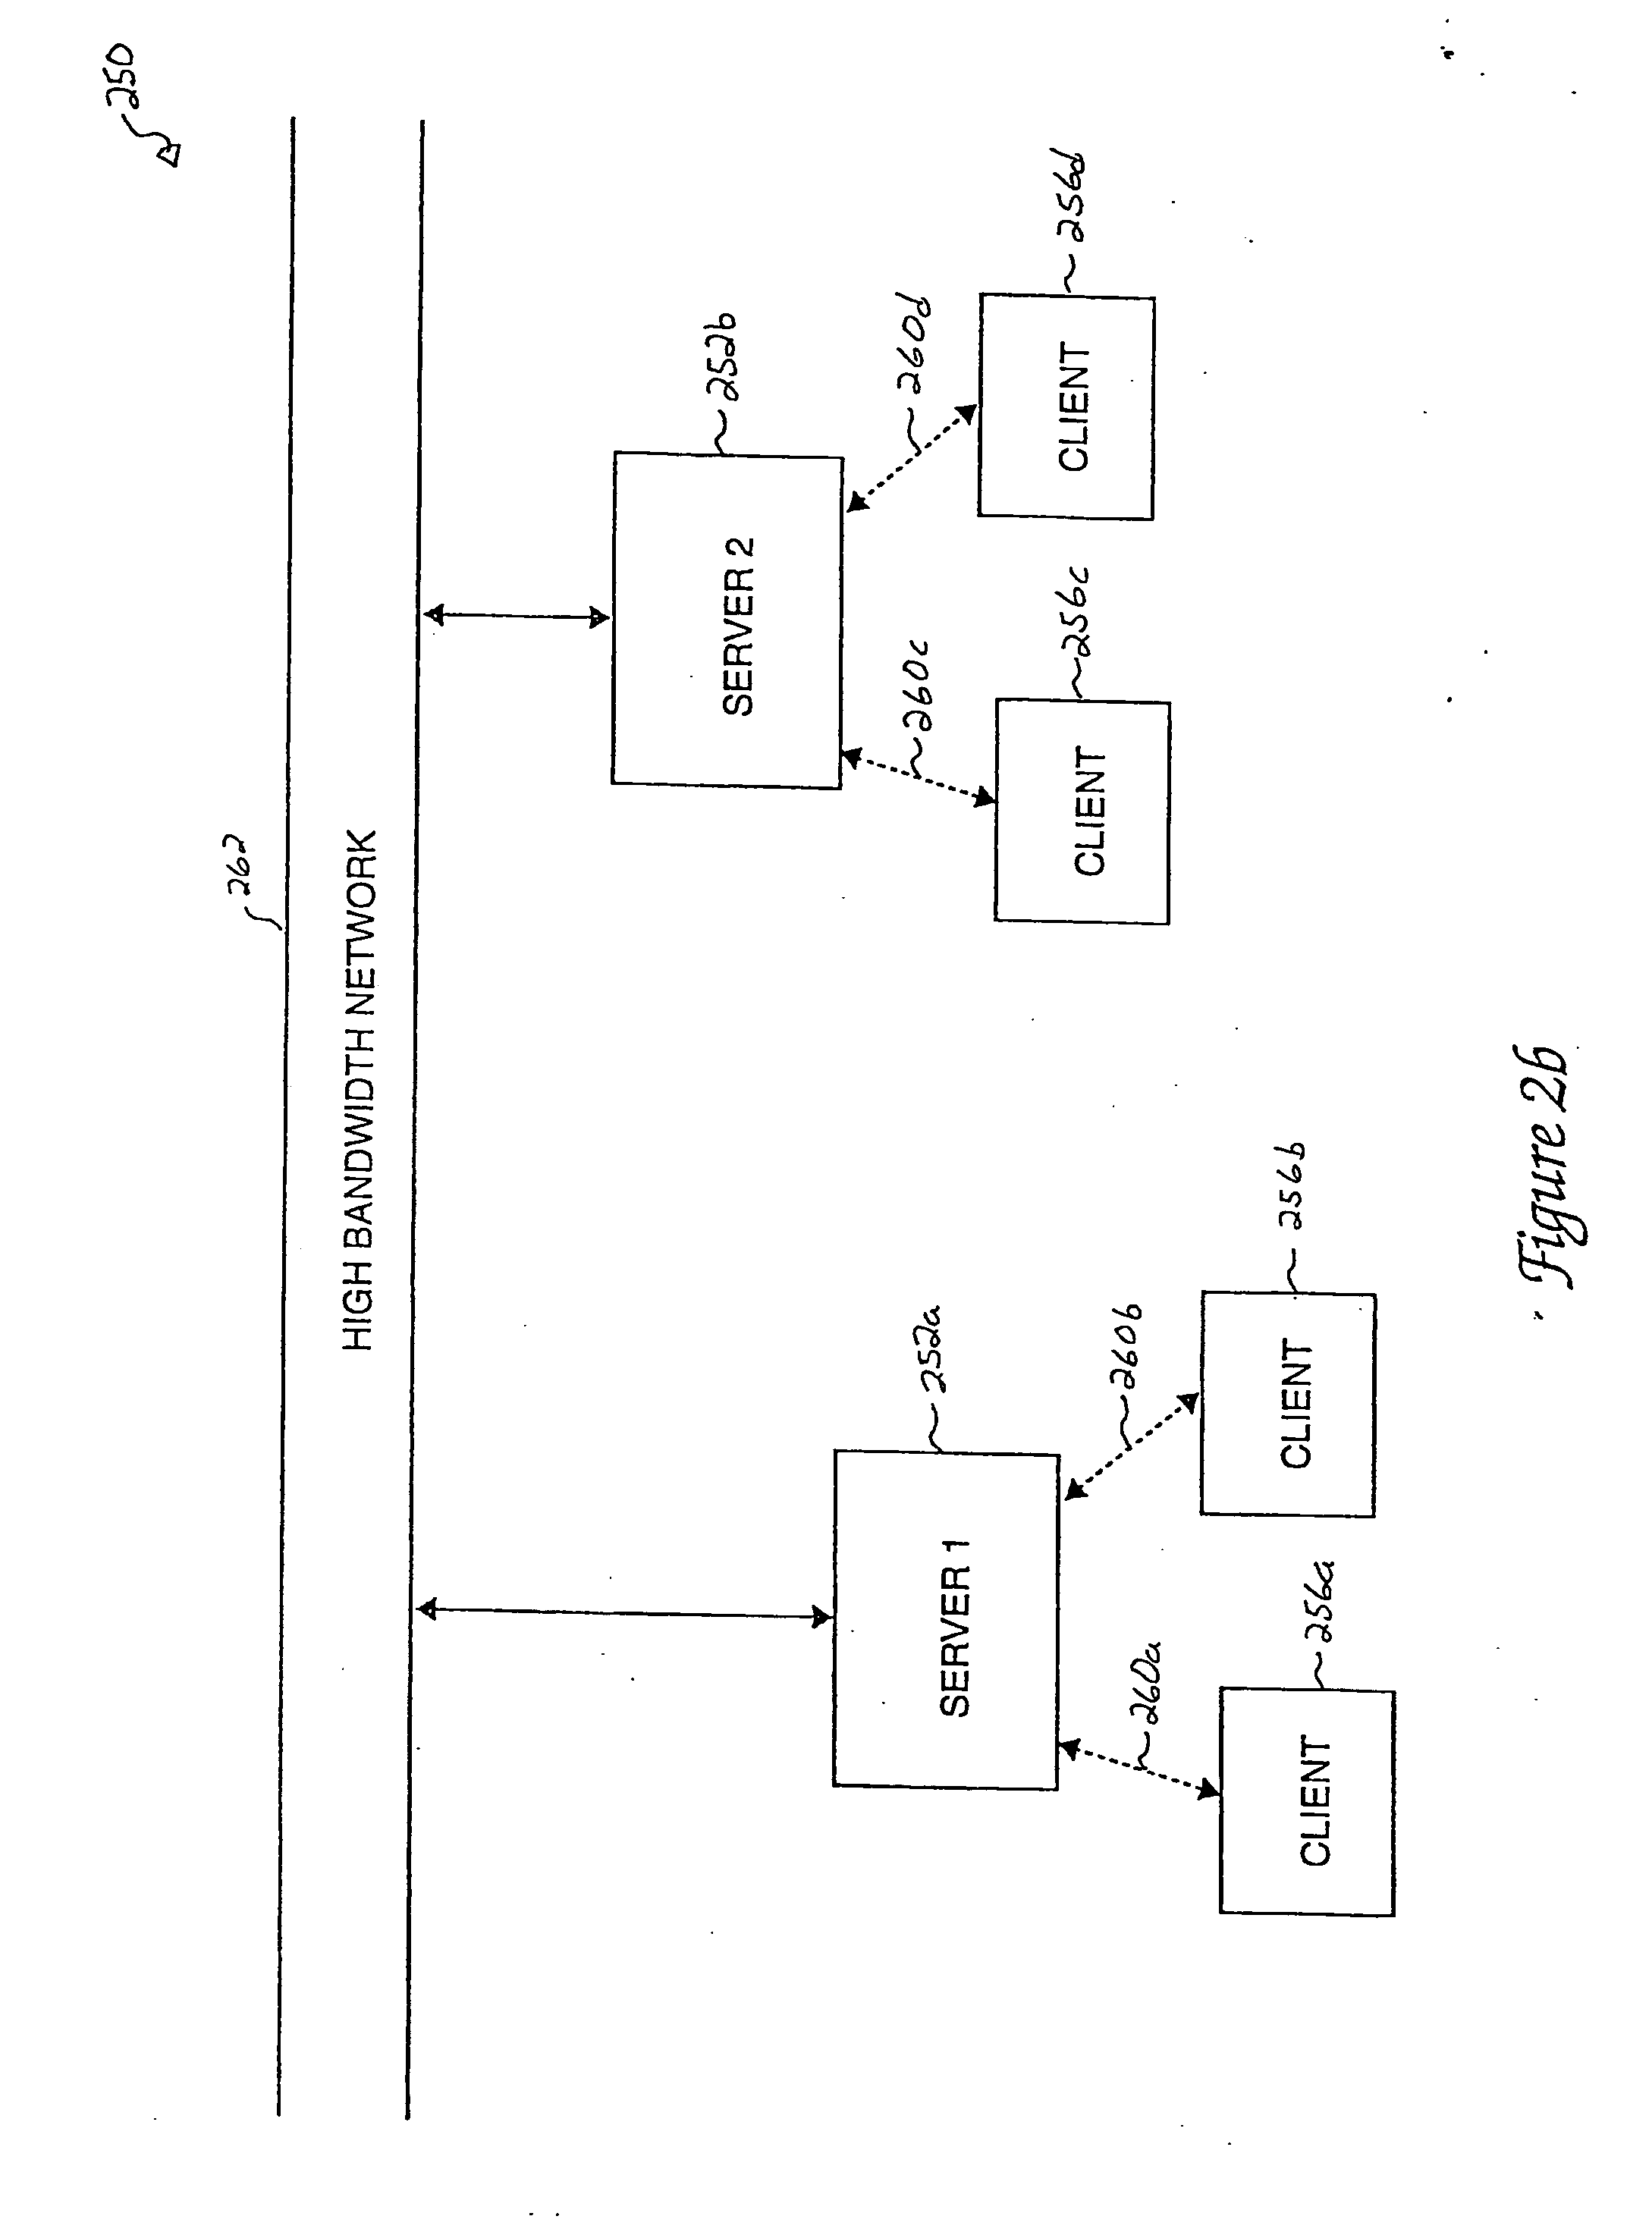 Method and apparatus for updating information in a low-bandwidth client/server object-oriented system